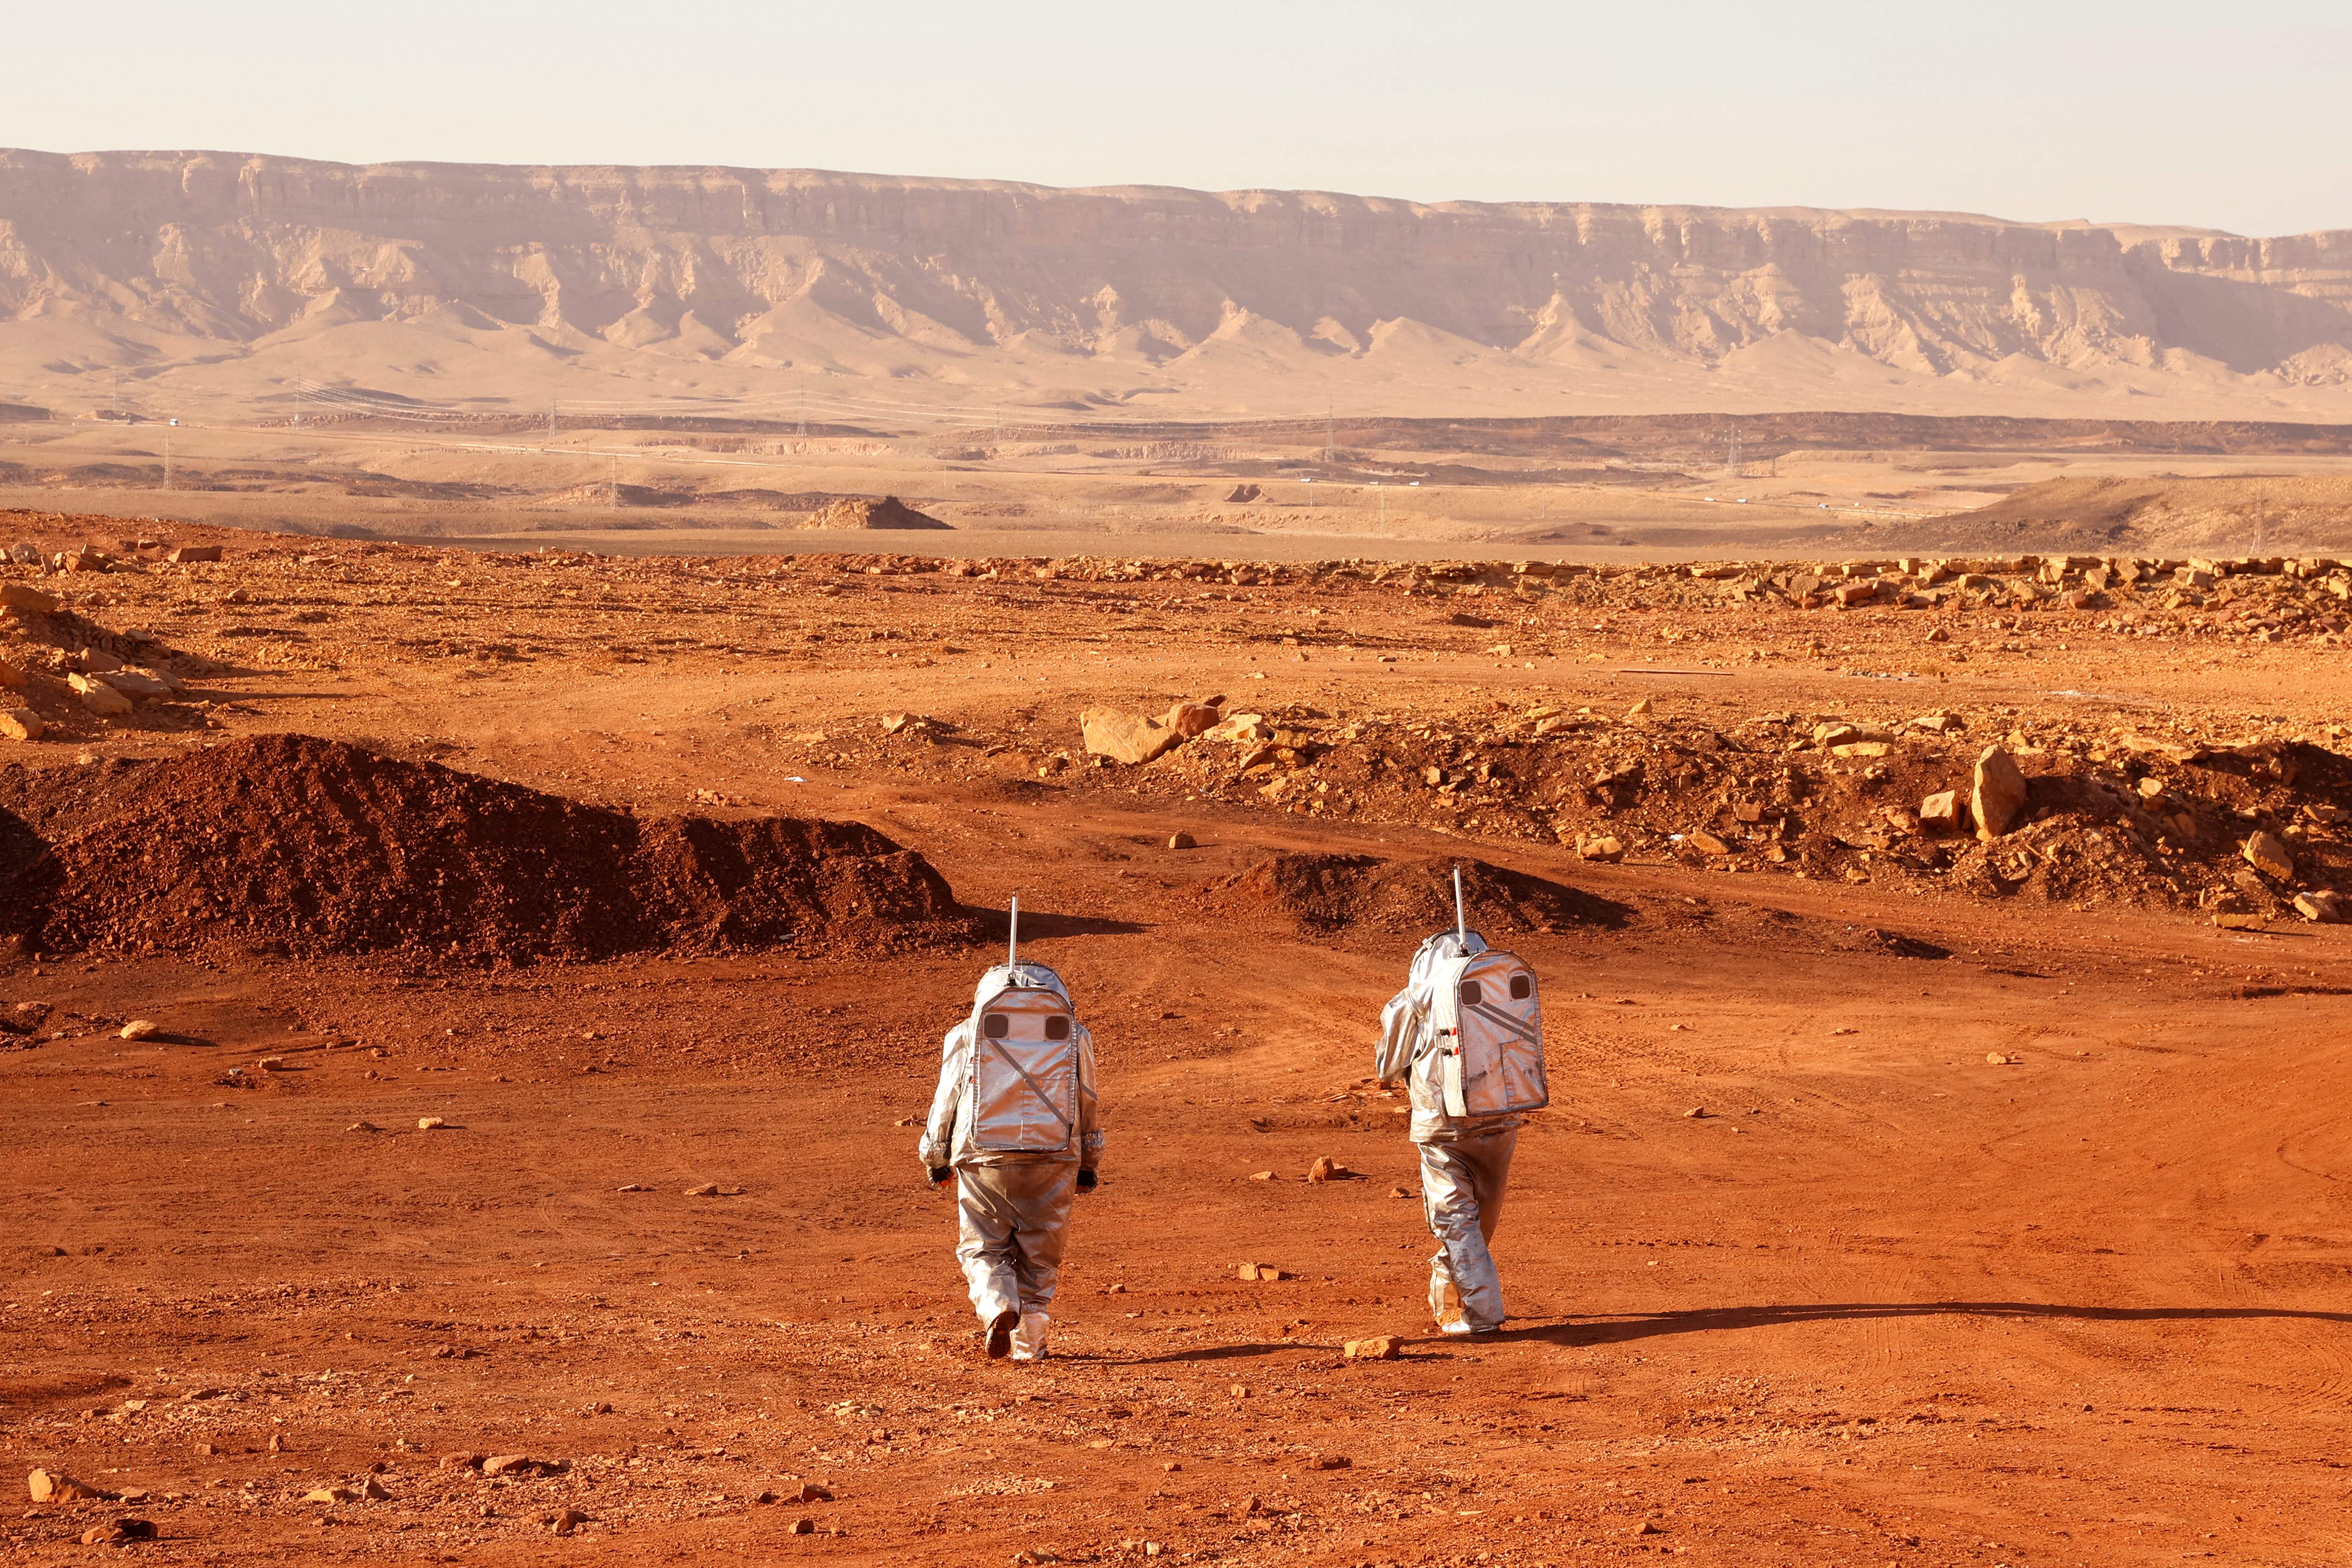 Two astronauts walk in spacesuits during a training mission for planet Mars at the Ramon Crater in Mitzpe Ramon in Israel's southern Negev desert, 2021